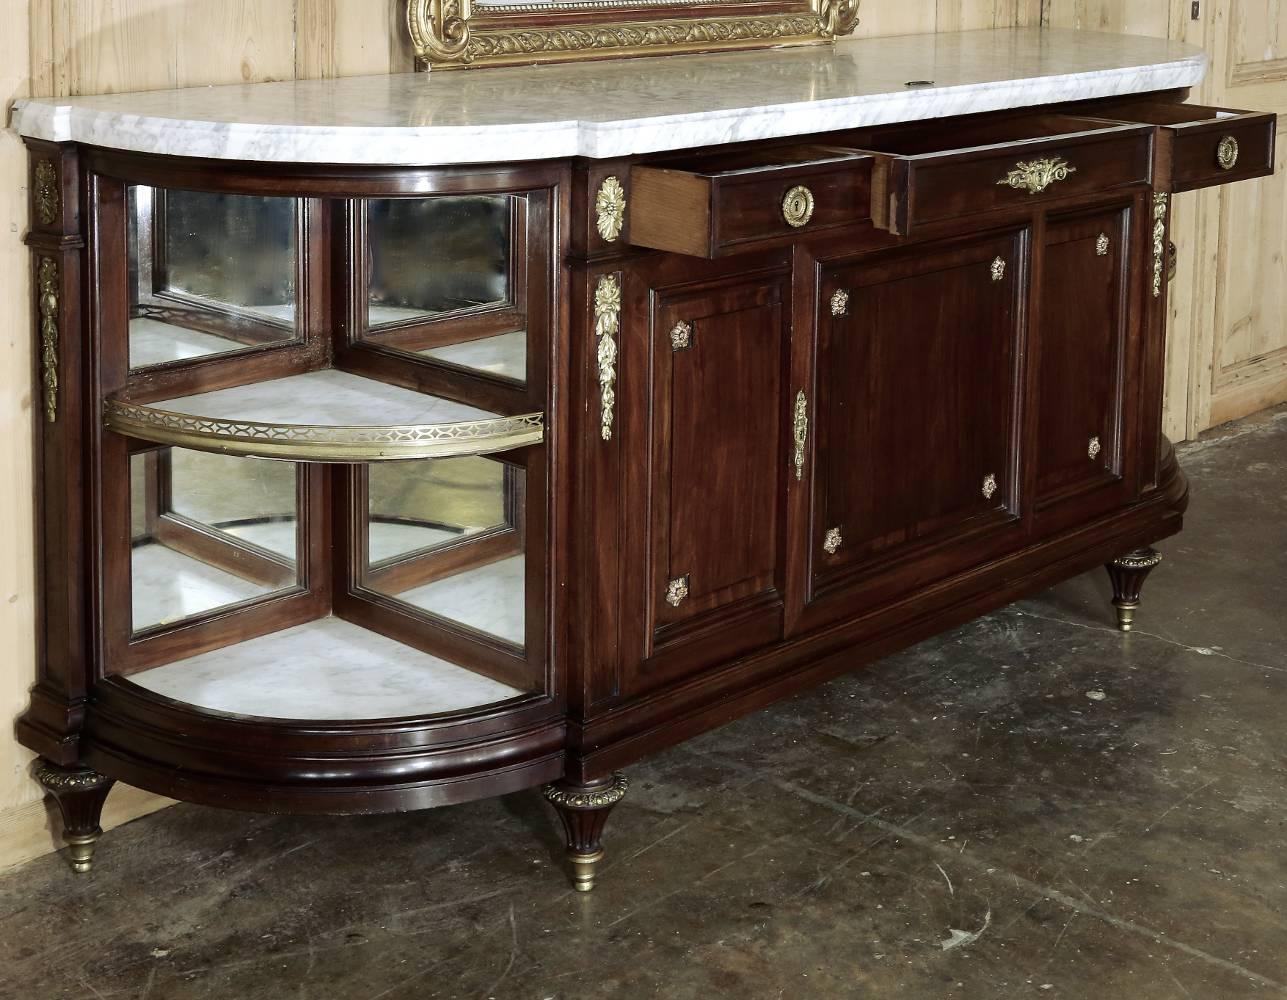 Gilt 19th Century French Louis XVI Style Marble-Top Ormolu Buffet by Maison Krieger